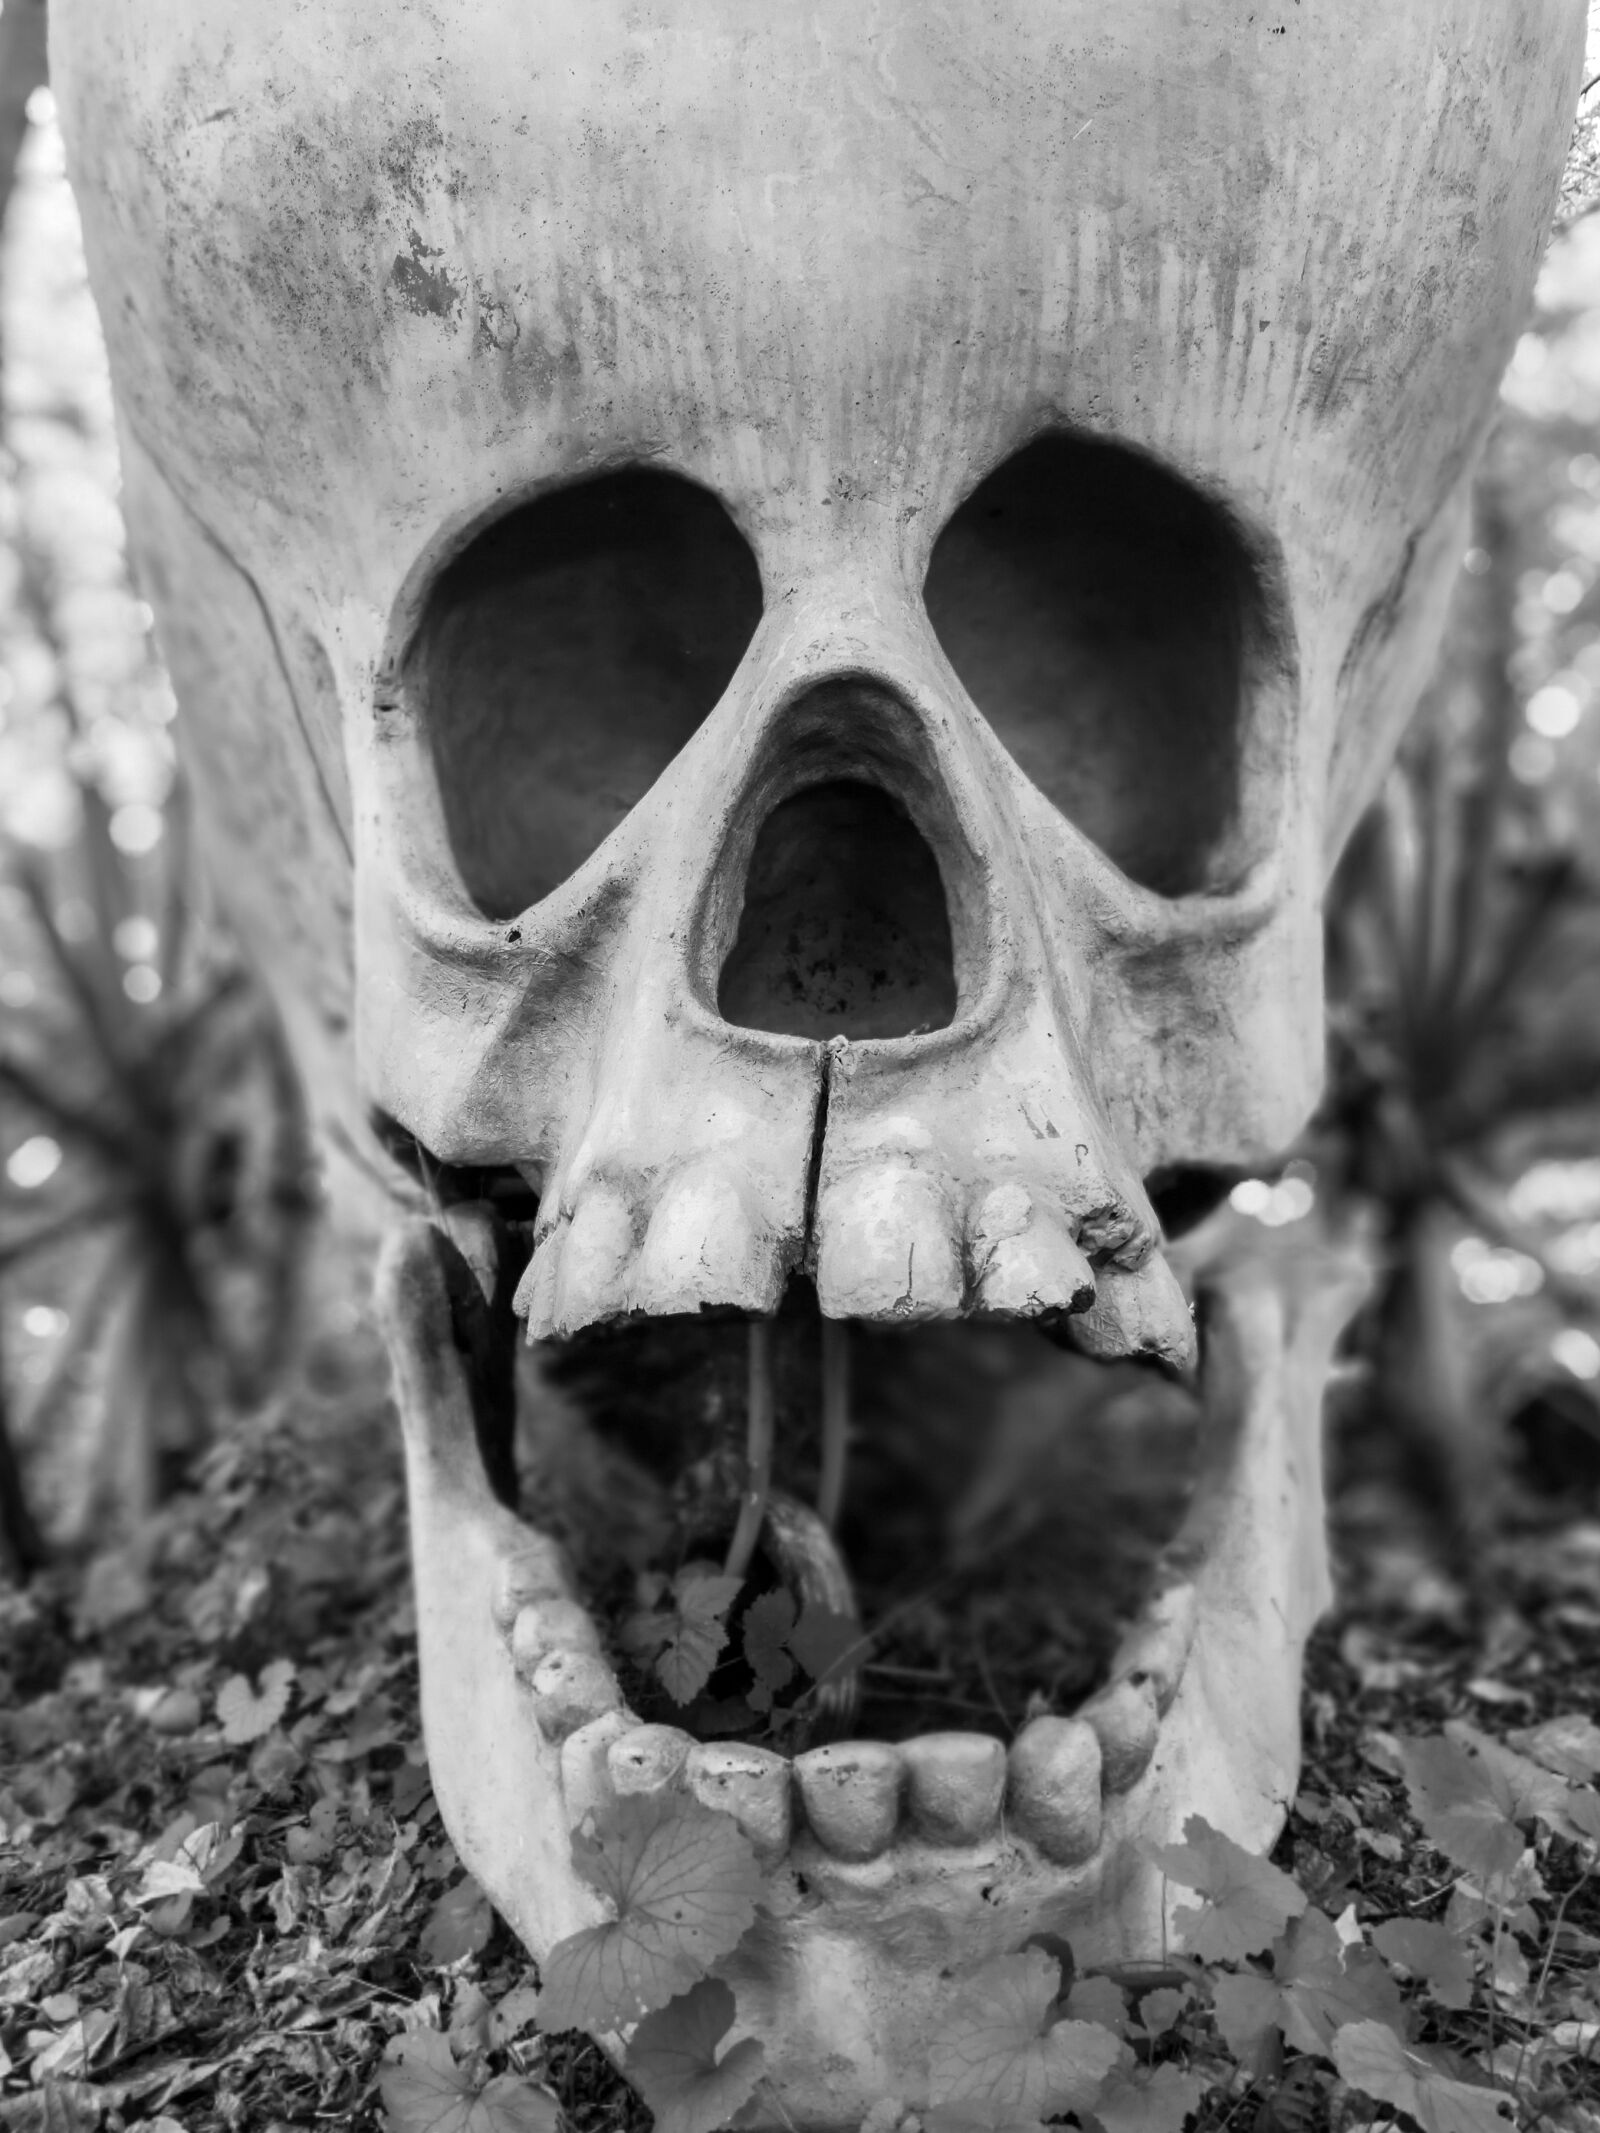 HUAWEI P10 Plus sample photo. Death, skull photography